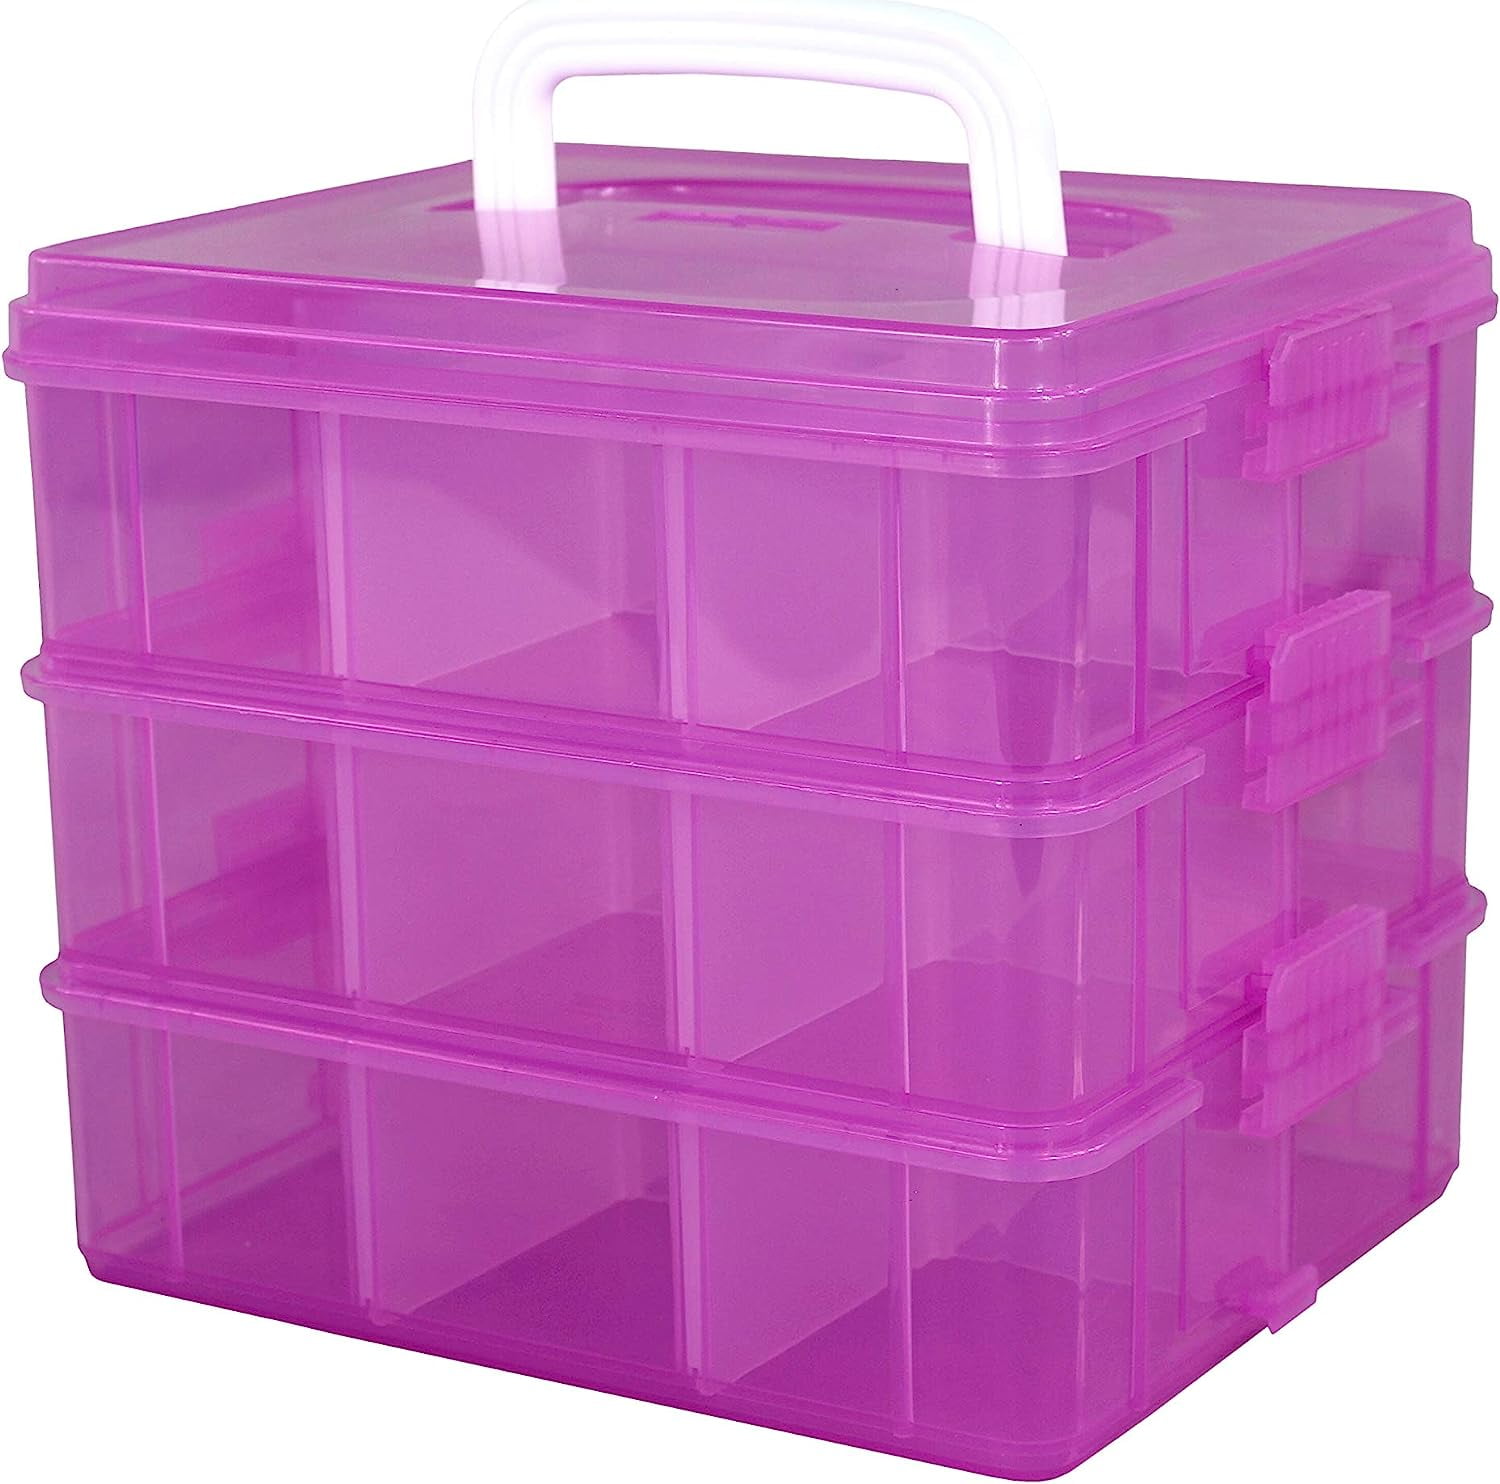 Yayun 3-Tier Pink Stackable Storage Container with Dividers, 18